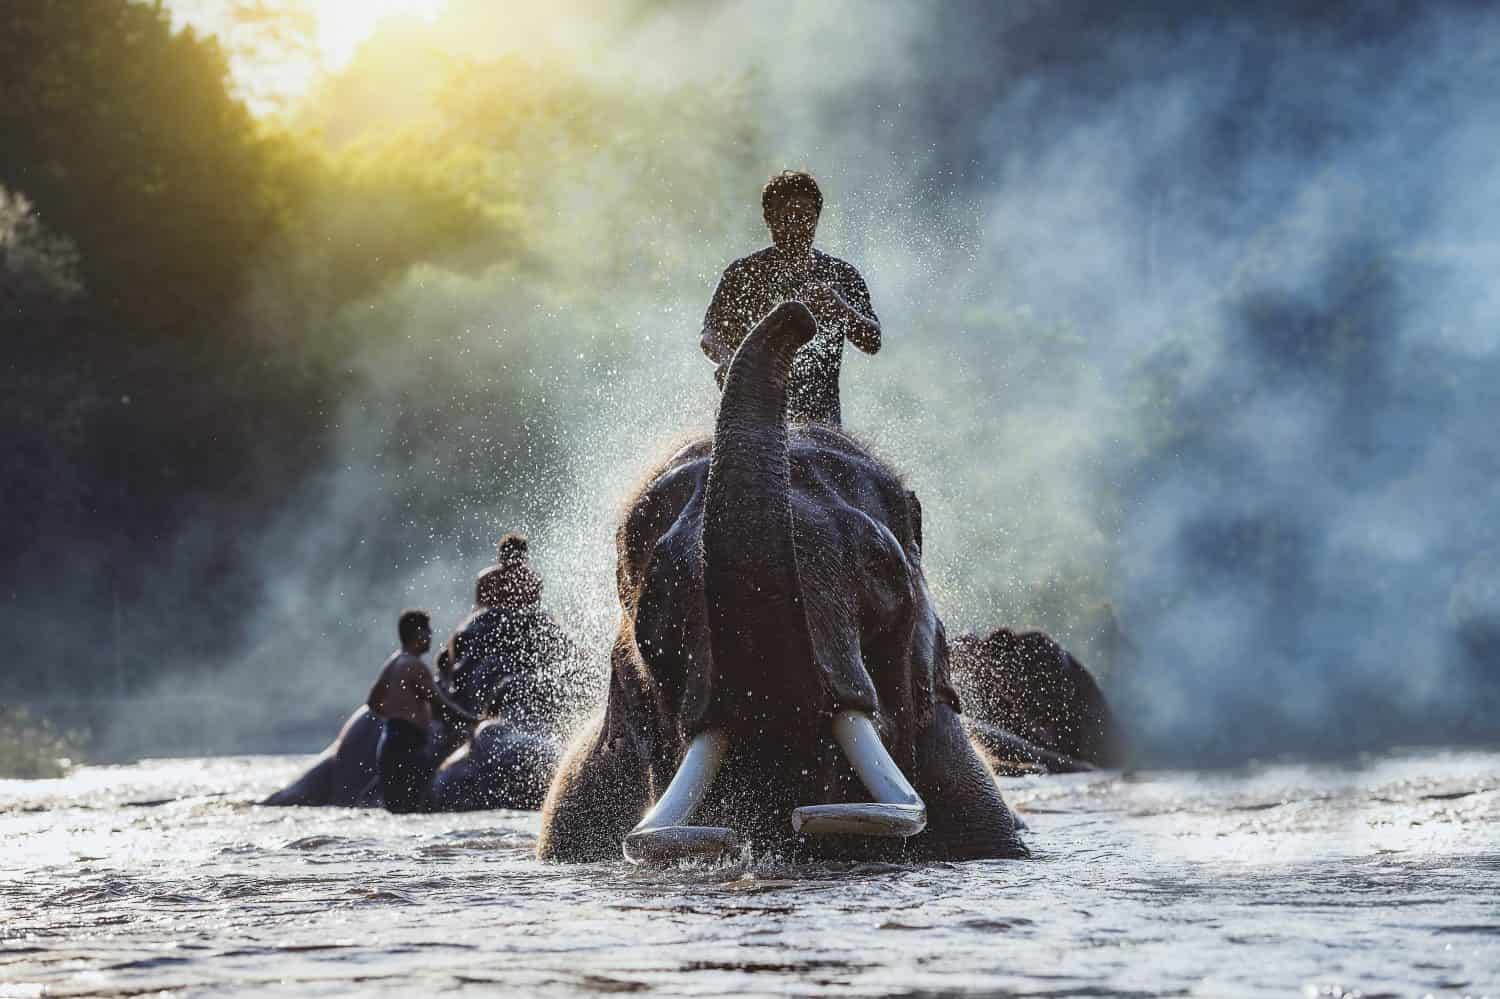 CHIANG MAI,THAILAND,elephants taking a bath with mahout in river,Visitors can visit nature closely,tourist riding on elephants trekking in Chiang Mai Thailand.